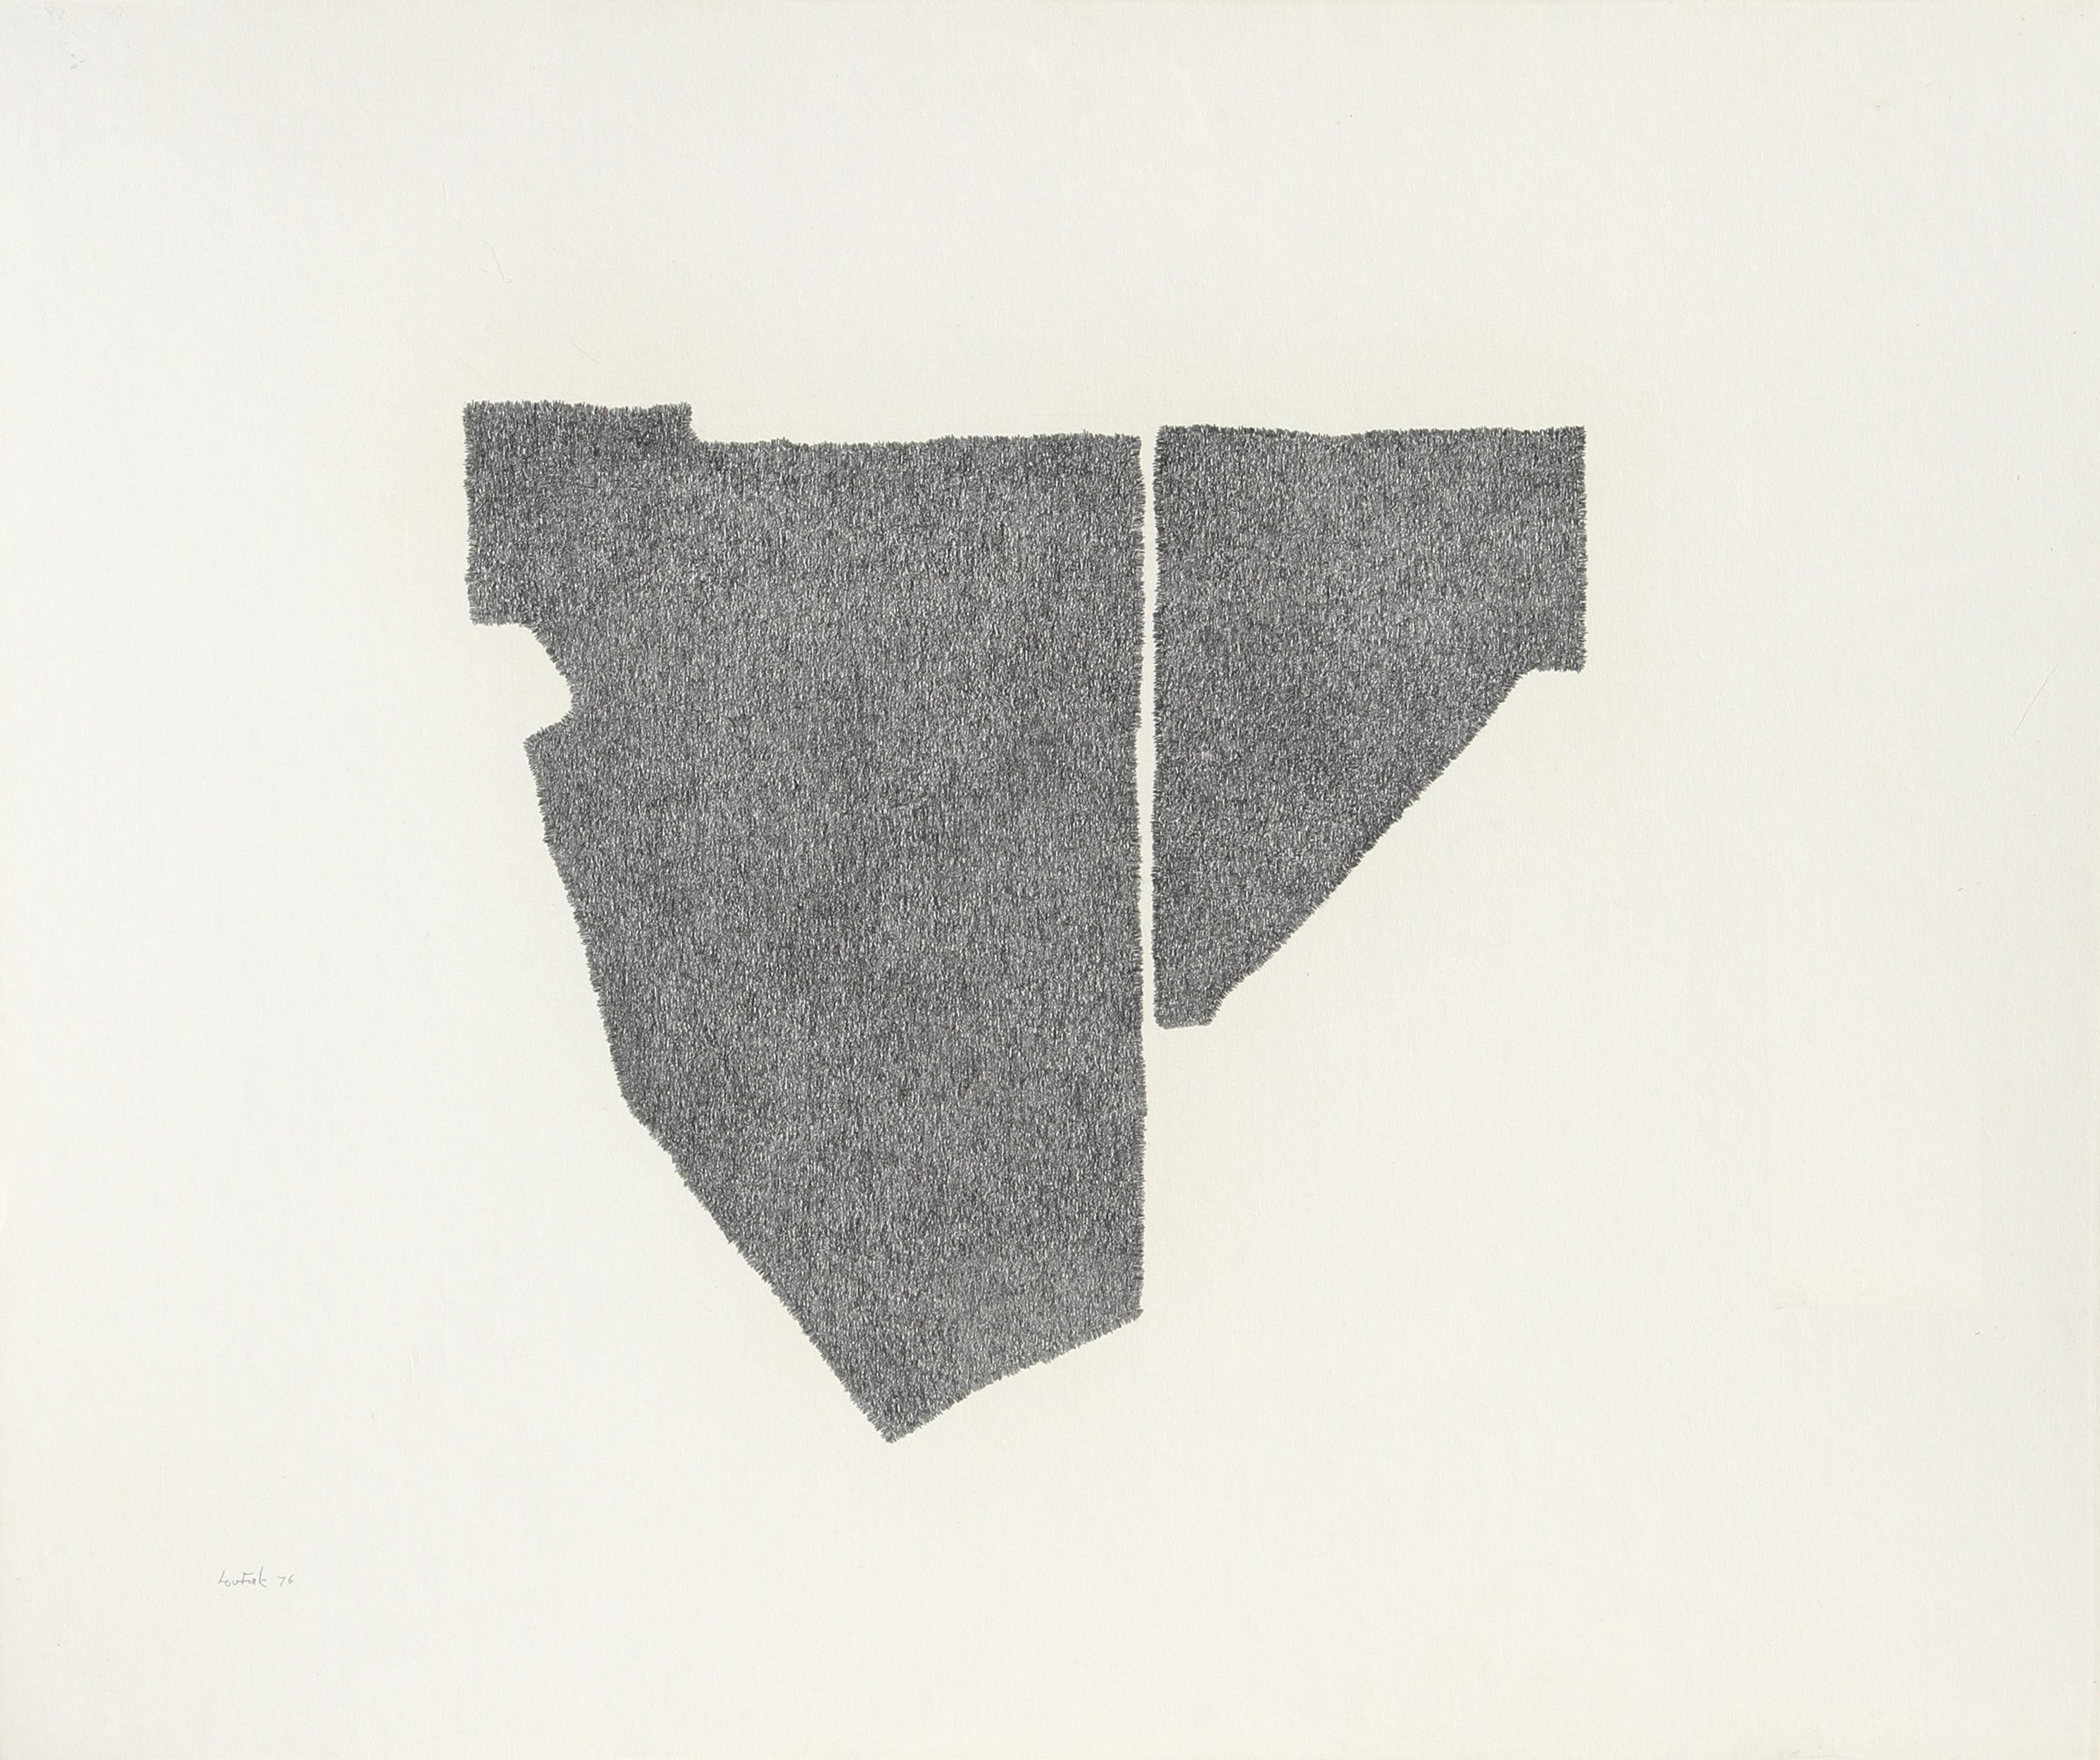 Wood Edge, 1976, Pencil Drawing by Lou Fink